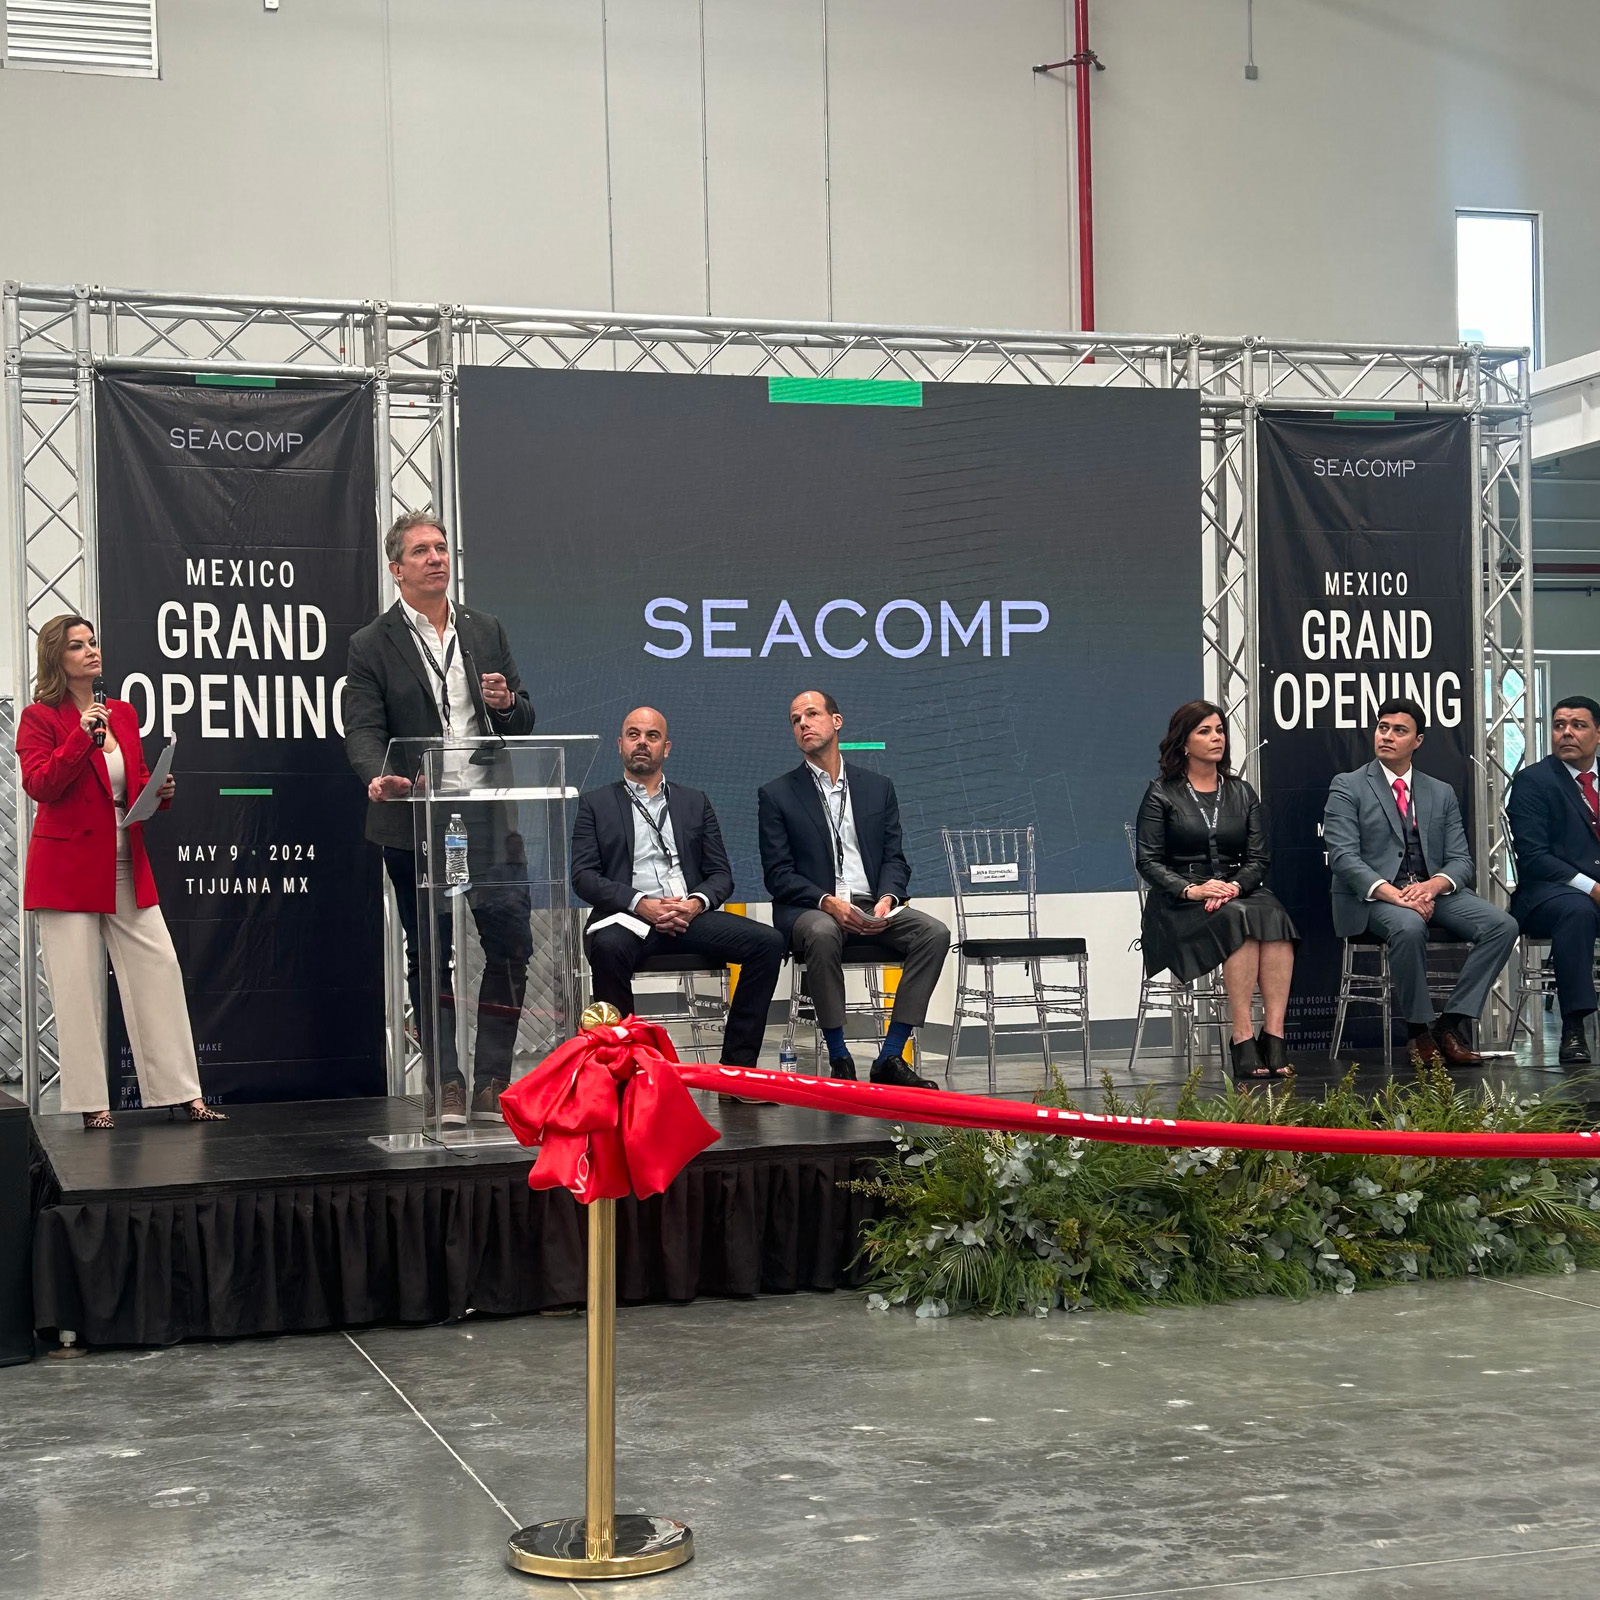 SEACOMP Mexico Grand Opening Inaugural Ceremony